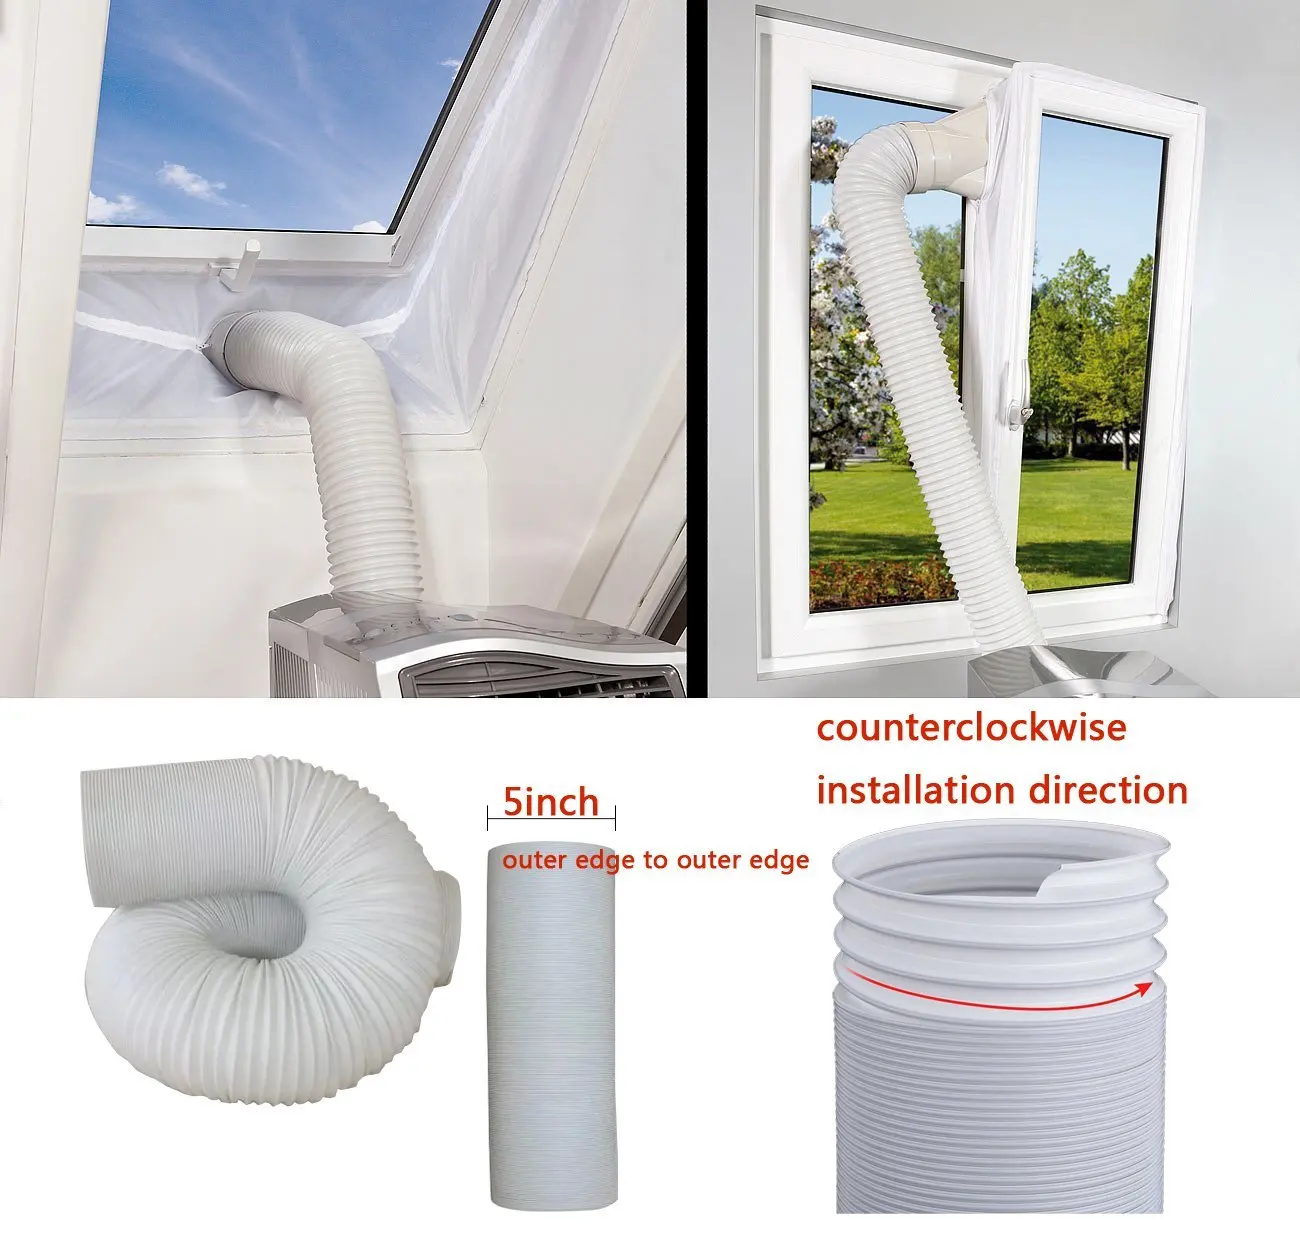 PVC Extend Vent Hose for Portable Air Conditioner Replacement hose，Counterclockwise Installation Direction Length 59 Inch JIANZHENKEJI 5 Inch Diameter Intake/Exhaust Hose 